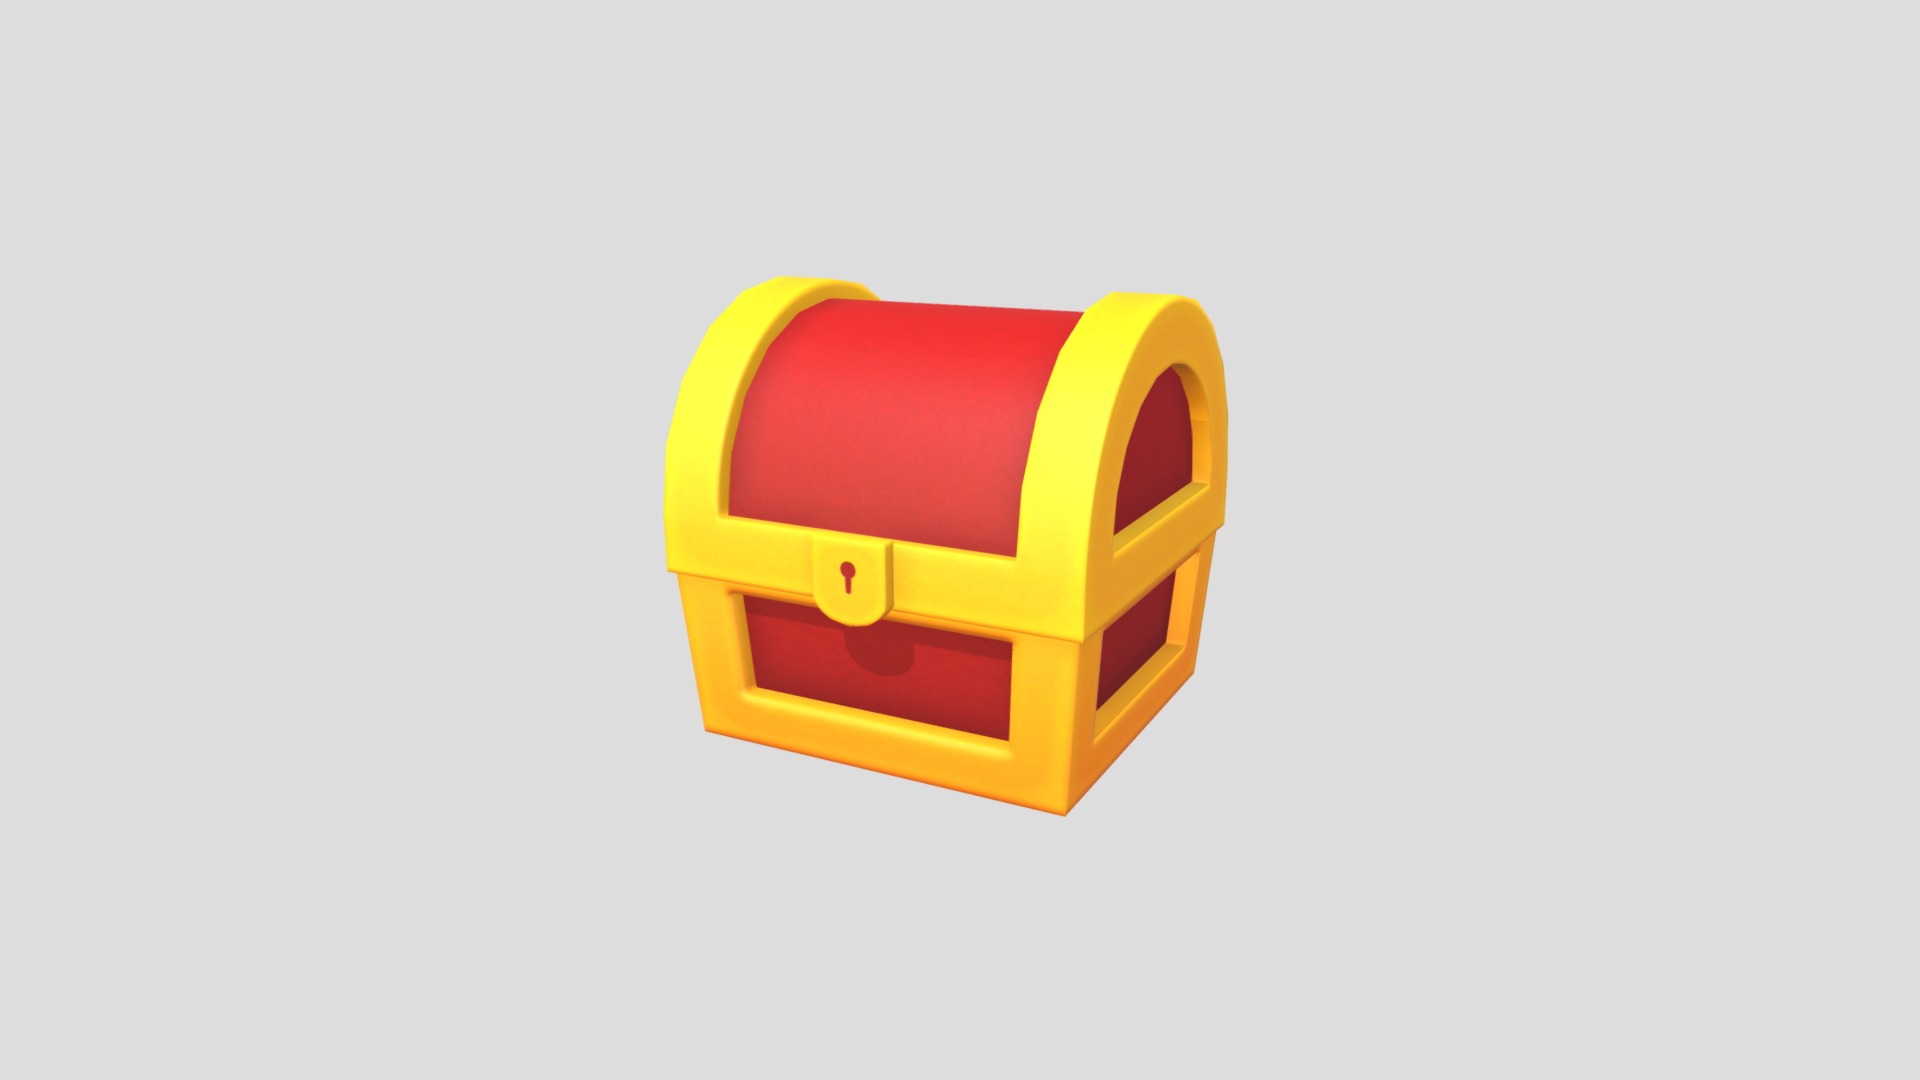 3D model Chest - This is a 3D model of the Chest. The 3D model is about a red and yellow cube.